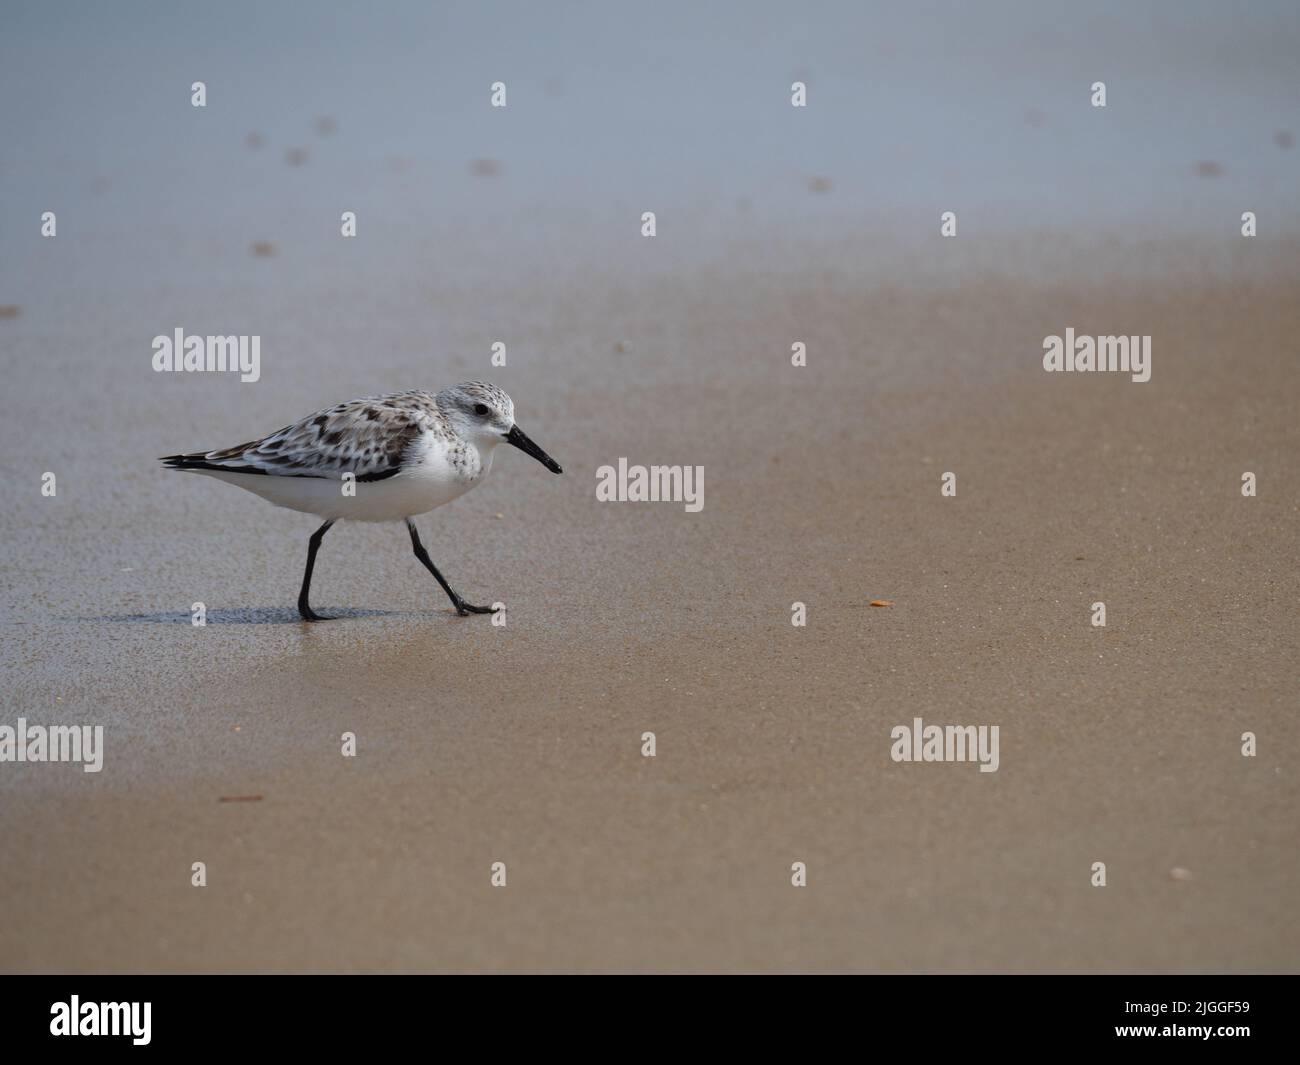 Adult Sanderling with black legs and beak walking on a sandy beach in North Carolina. Photographed in profile with a shallow depth of field. Stock Photo